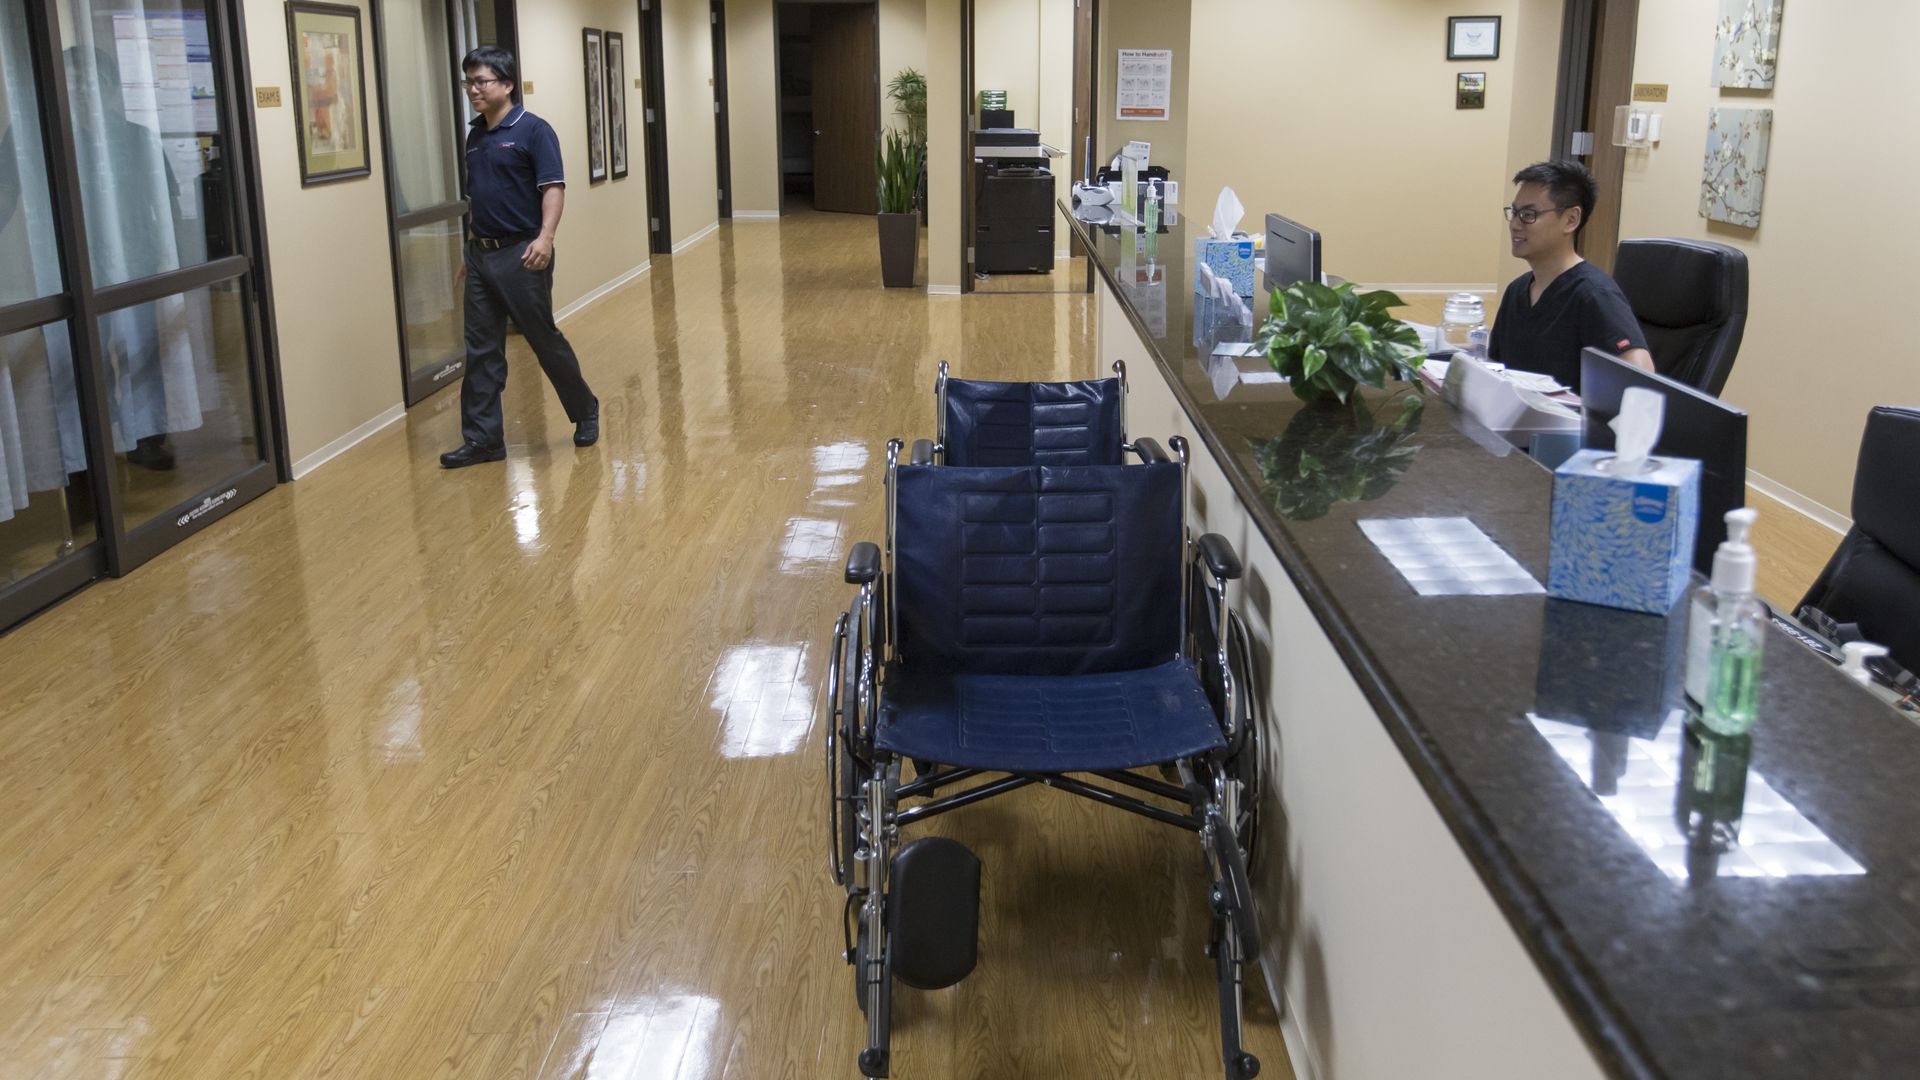 A nurse sits behind a desk in an emergency room with wheelchairs nearby.